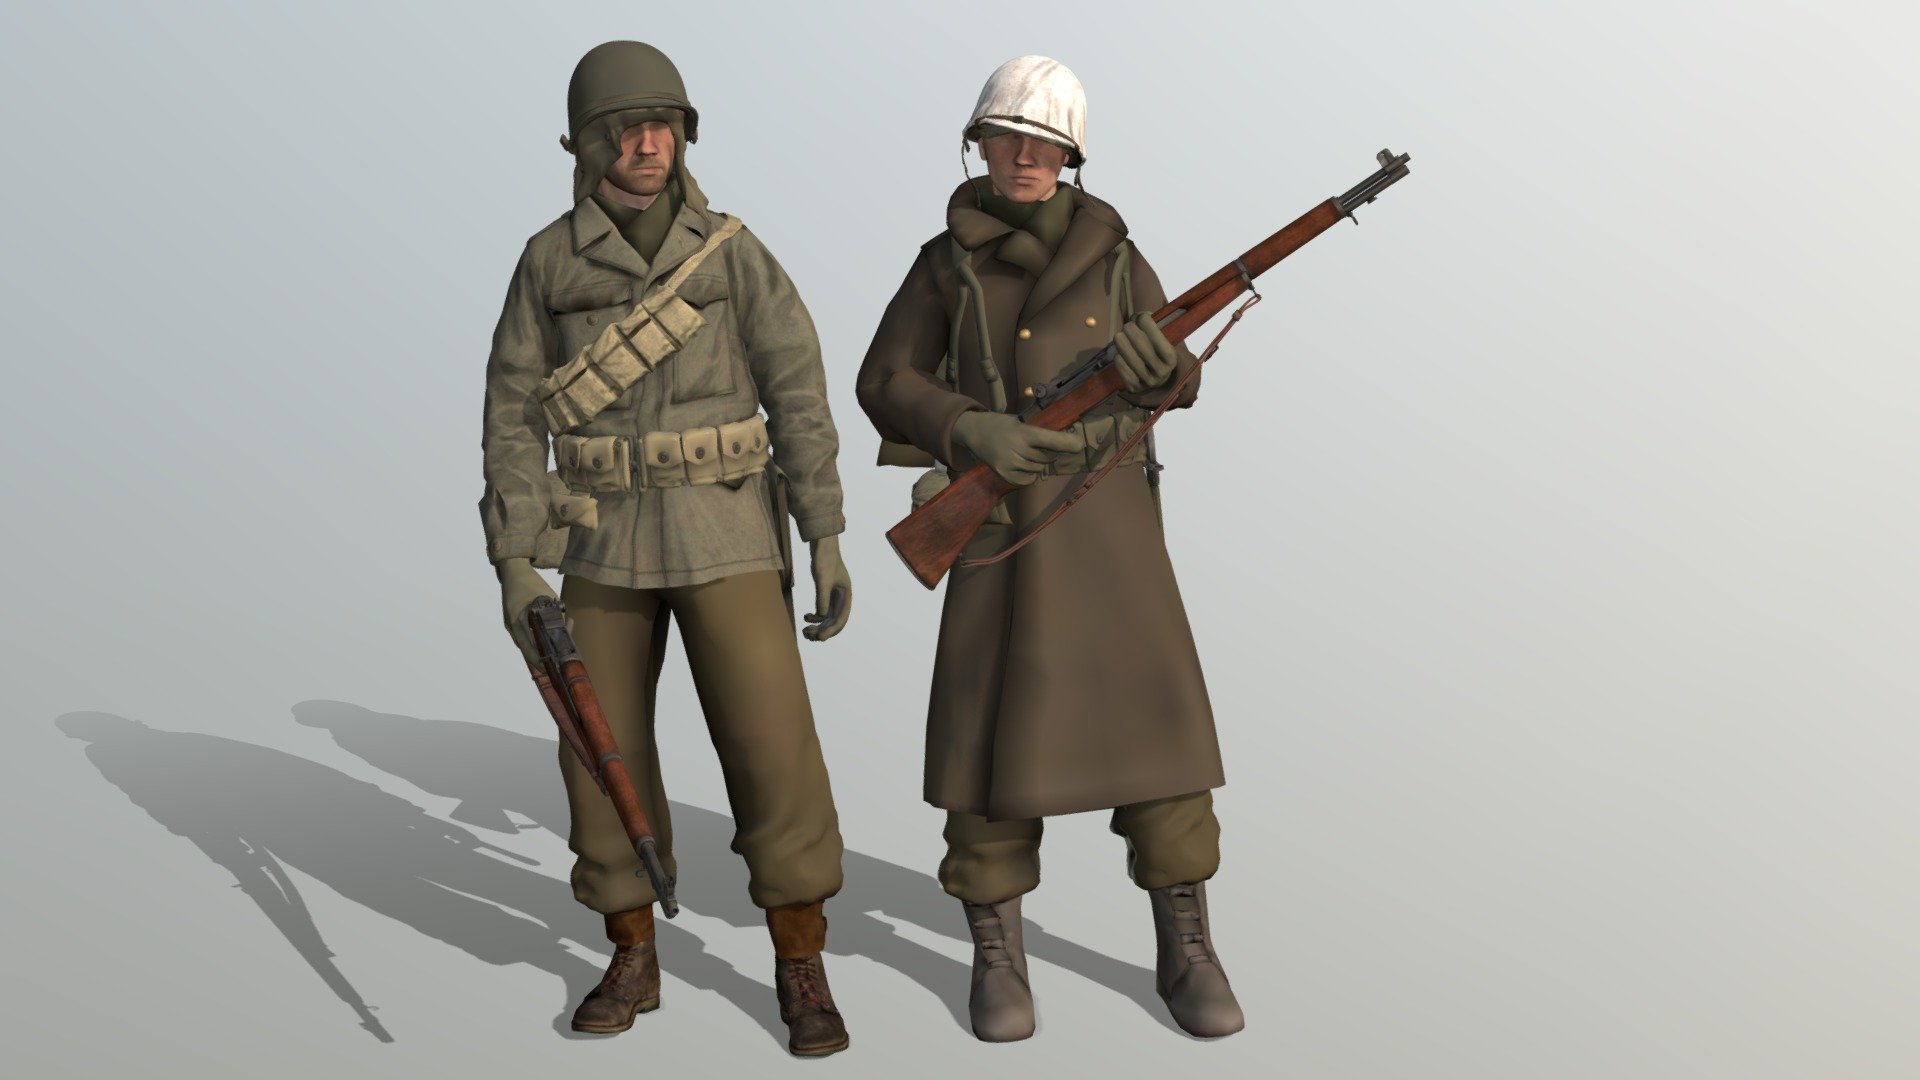 A combined effort of me and my mates to create a historical accurate depiction of the WW2 US Infantry. Made for Arma 3 as part of the Forgotten Fronts Project.

credits:




3D scanned highpoly by Scott Delbressine (for Helmets, carlisle pouch, and canteen) 

M1 helmet model reworked by Motta with textures Ethridge

3D scanned Buckle Boots model by Glen Harris, reworked by Motta and Ethridge

Cartridge belt, Bandoleer, and M1 Garand retopologized from Tannenbaum's model

M1 Garand texture by Mistiey 

bayonet model by Schwienny

Wool trousers sculpt by Asmoro

Base Head model and texture by Bohemia Interactive
 - US Infantry - Winter 1944 - 3D model by simcardo 3d model